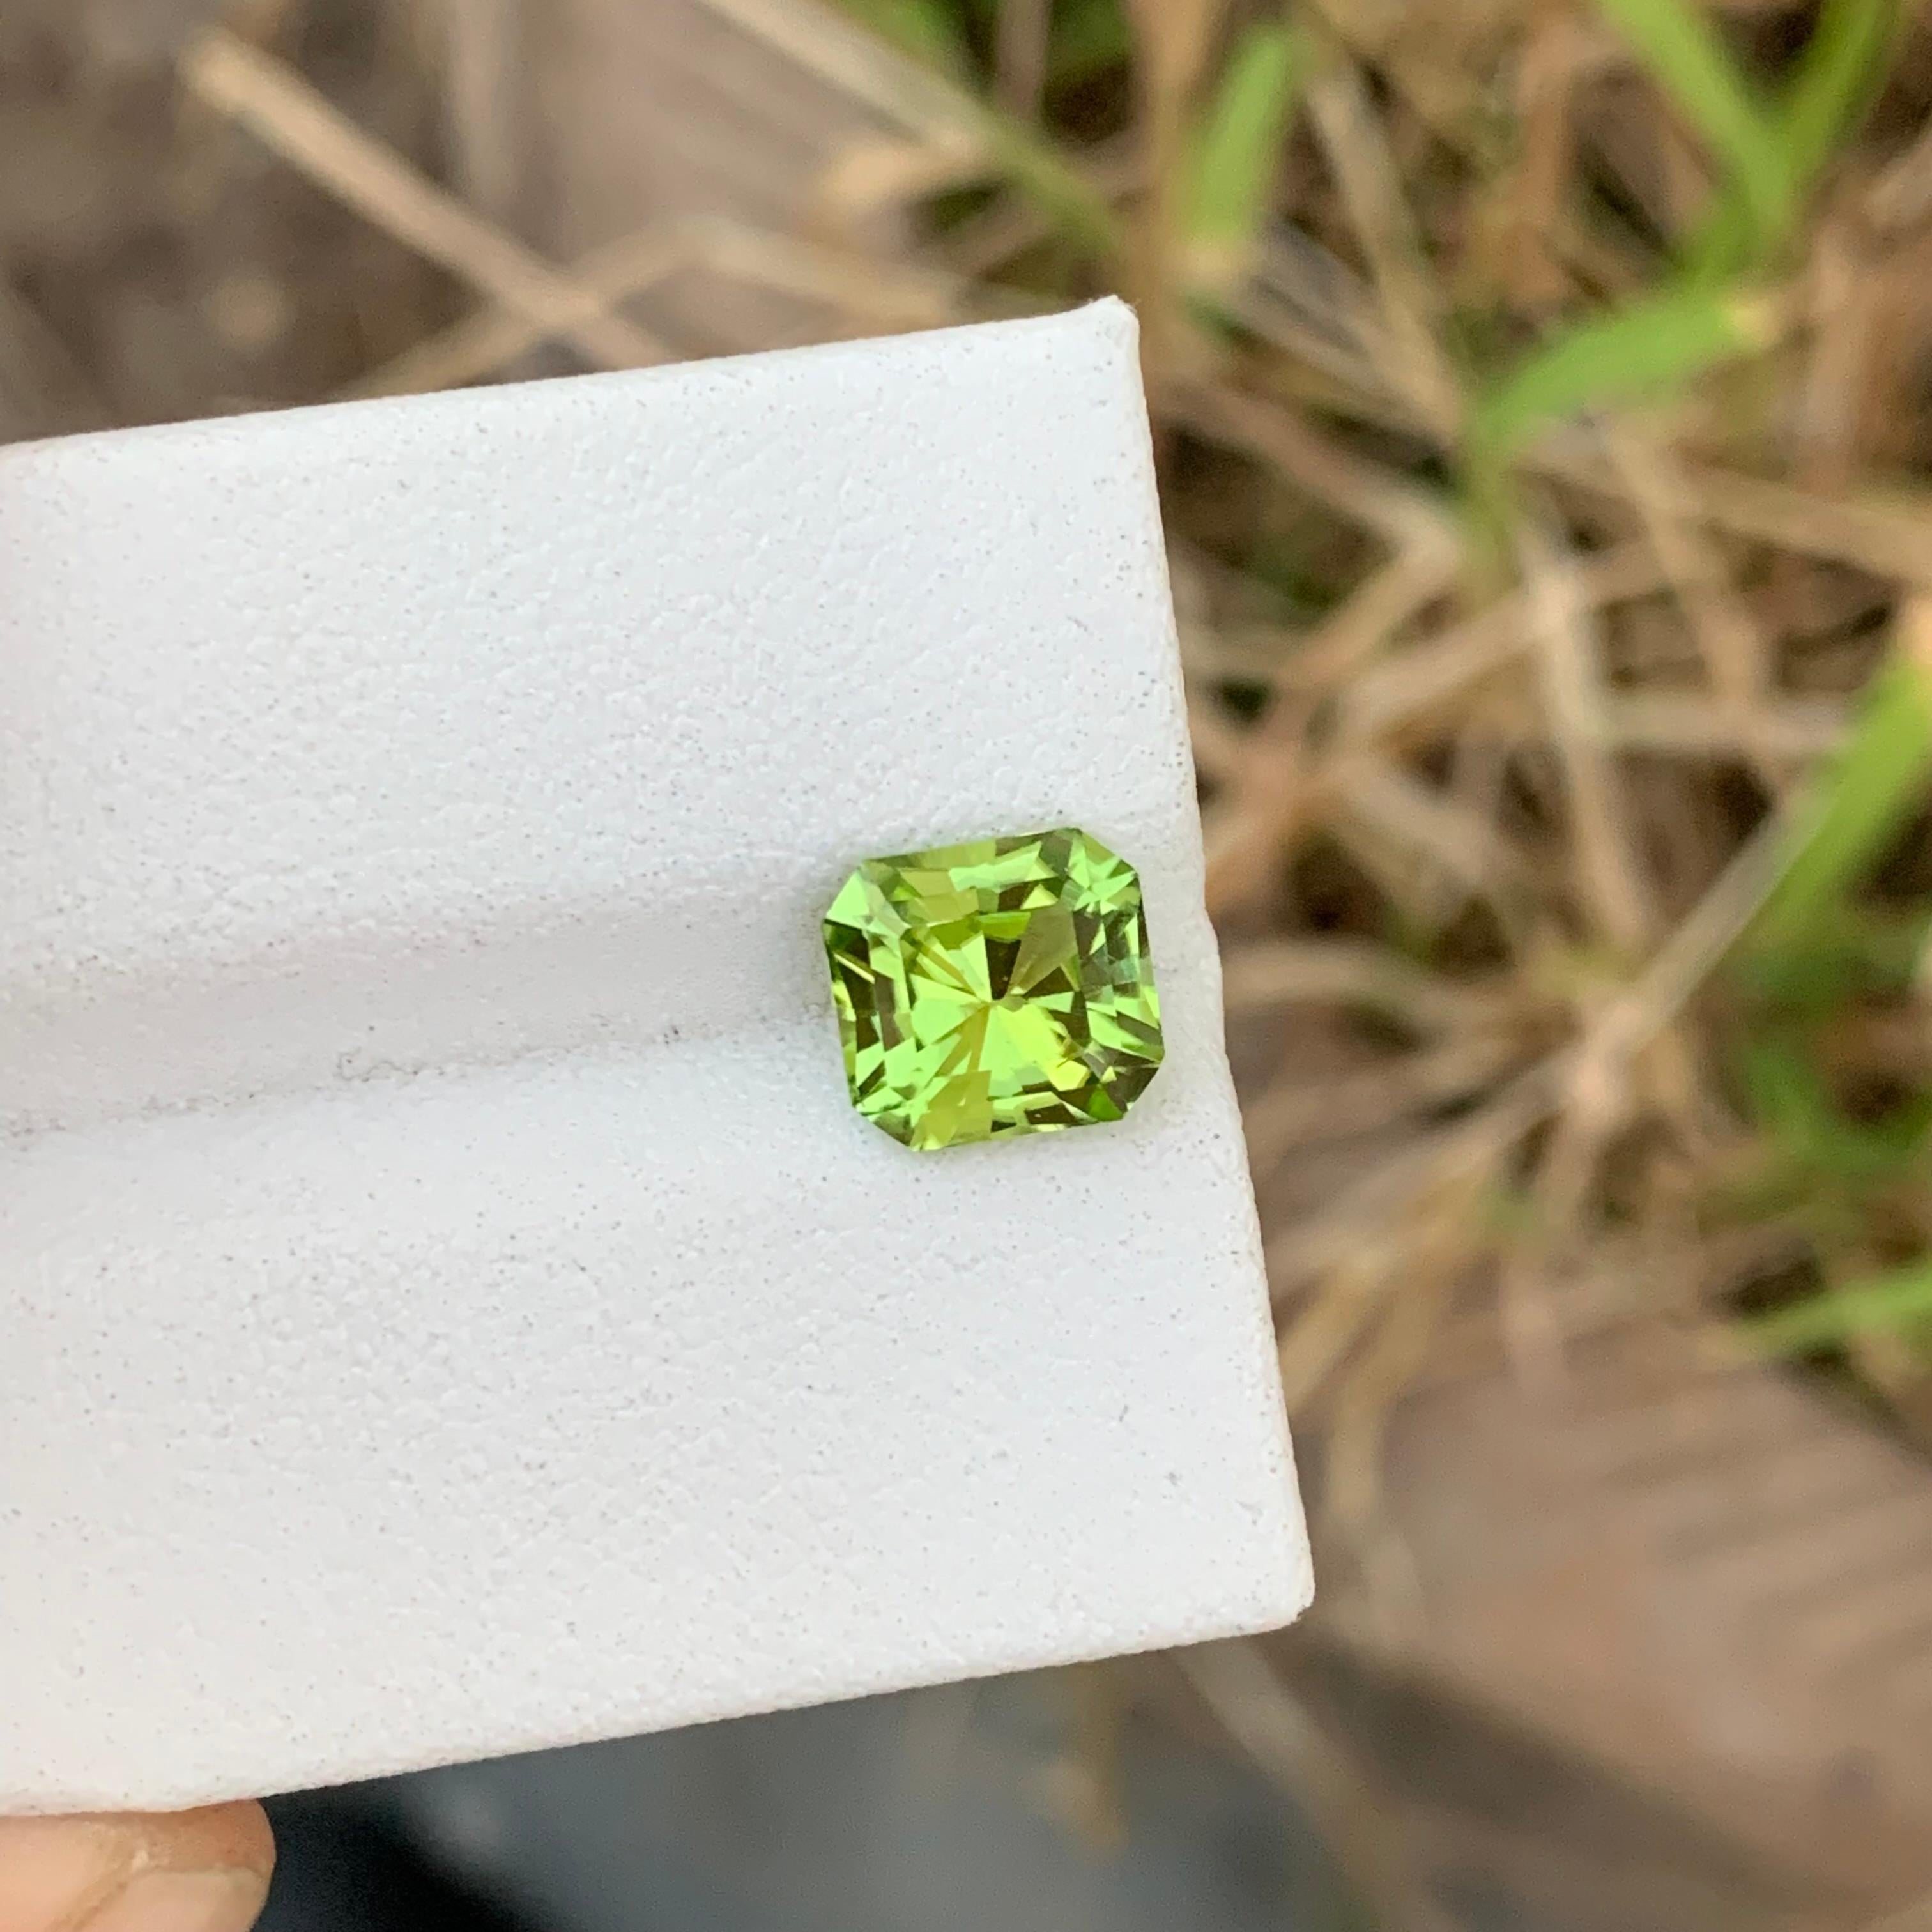 Arts and Crafts 2.10 Carat Natural Loose Peridot Emerald Shape Gem From Earth Mine  For Sale